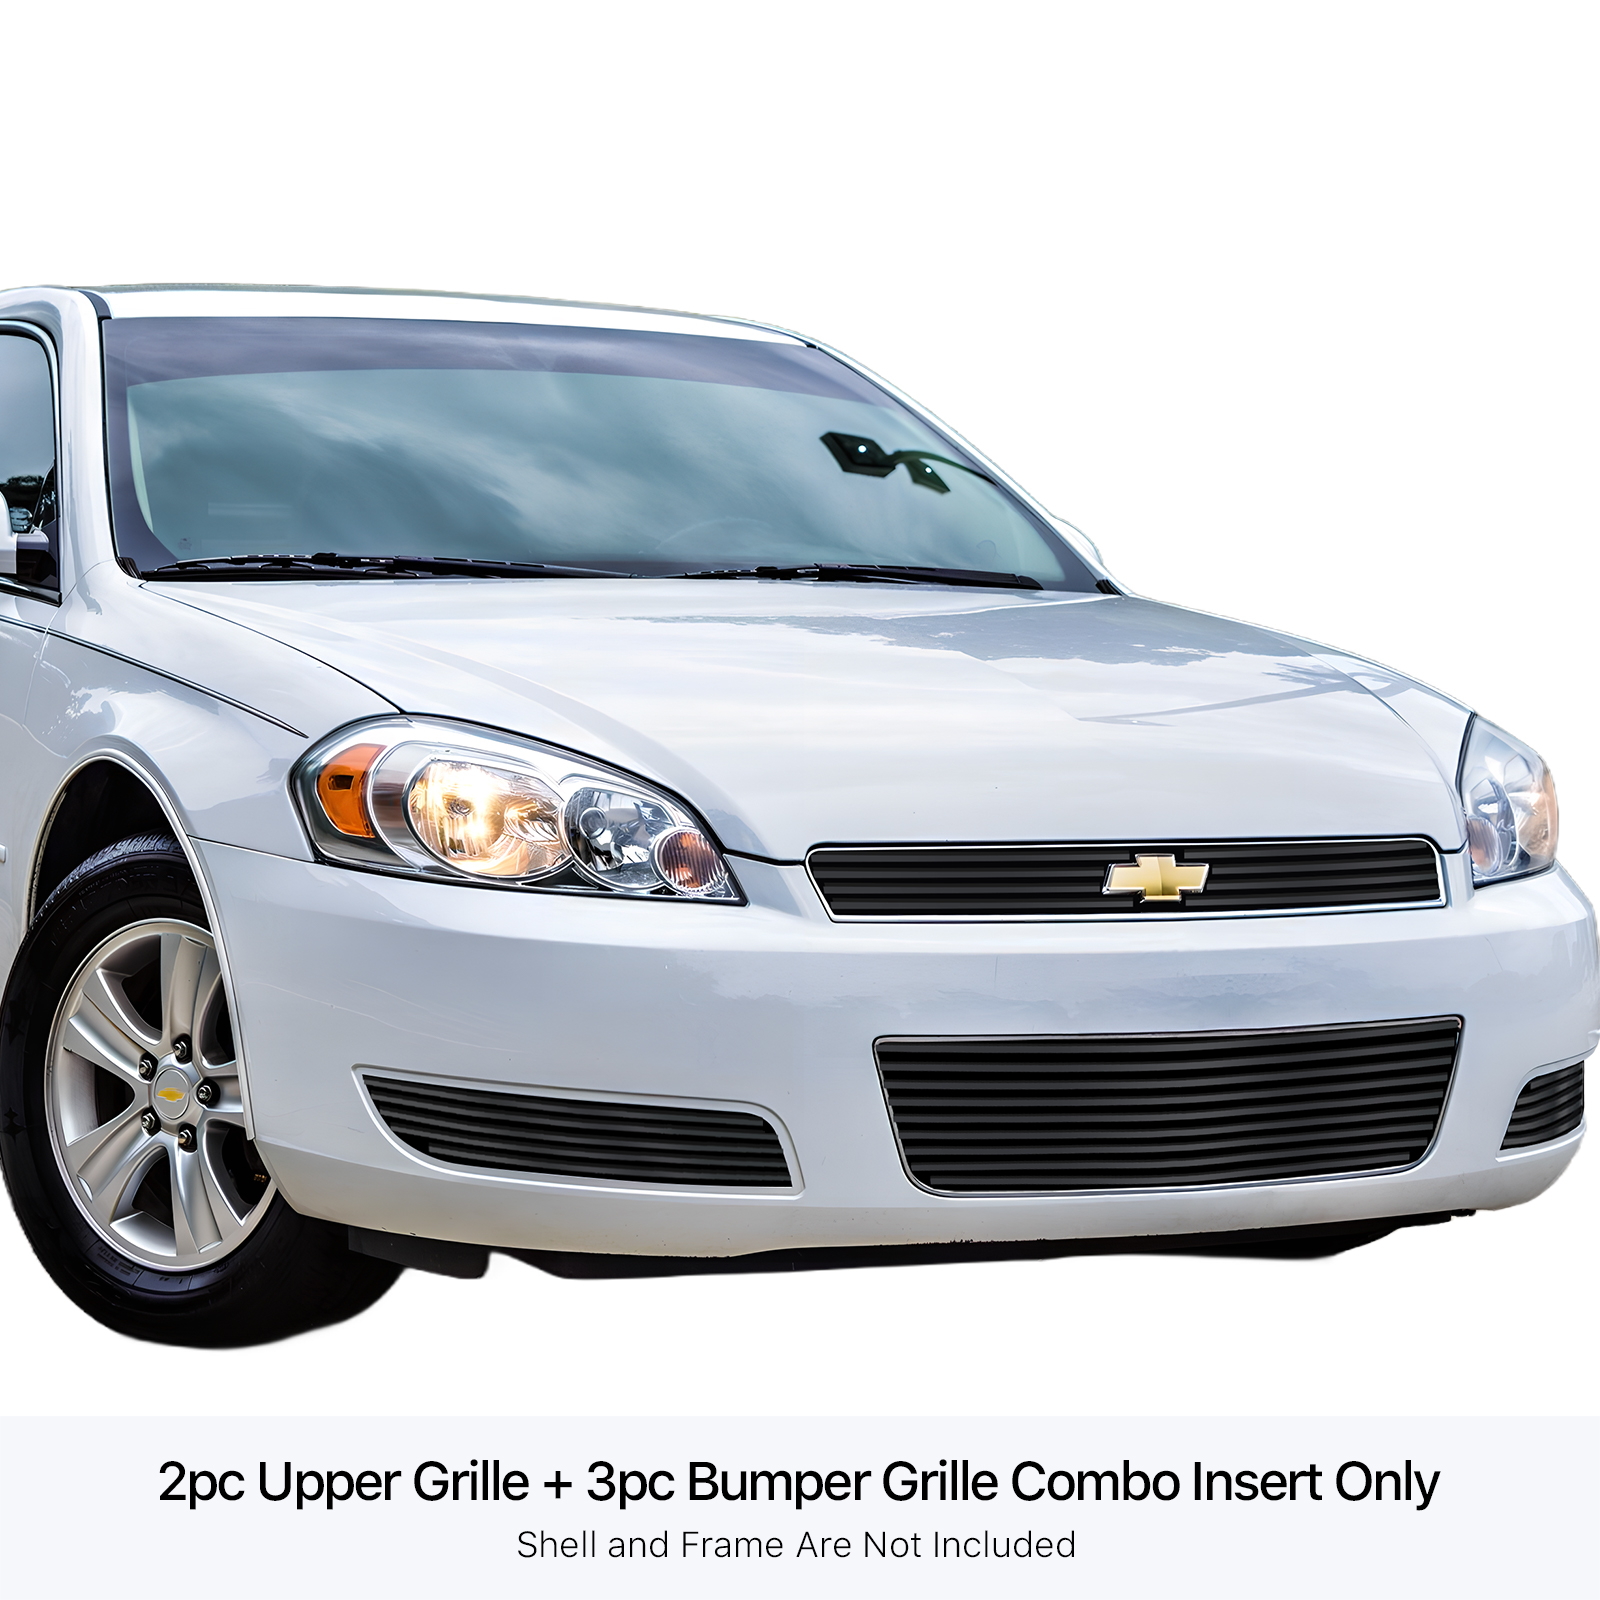 2006-2013 Chevy Impala LT Without Fog Light/2006-2013 Chevy Impala LS Without Fog Light MAIN UPPER + LOWER BUMPER Black Stainless Steel Billet Grille